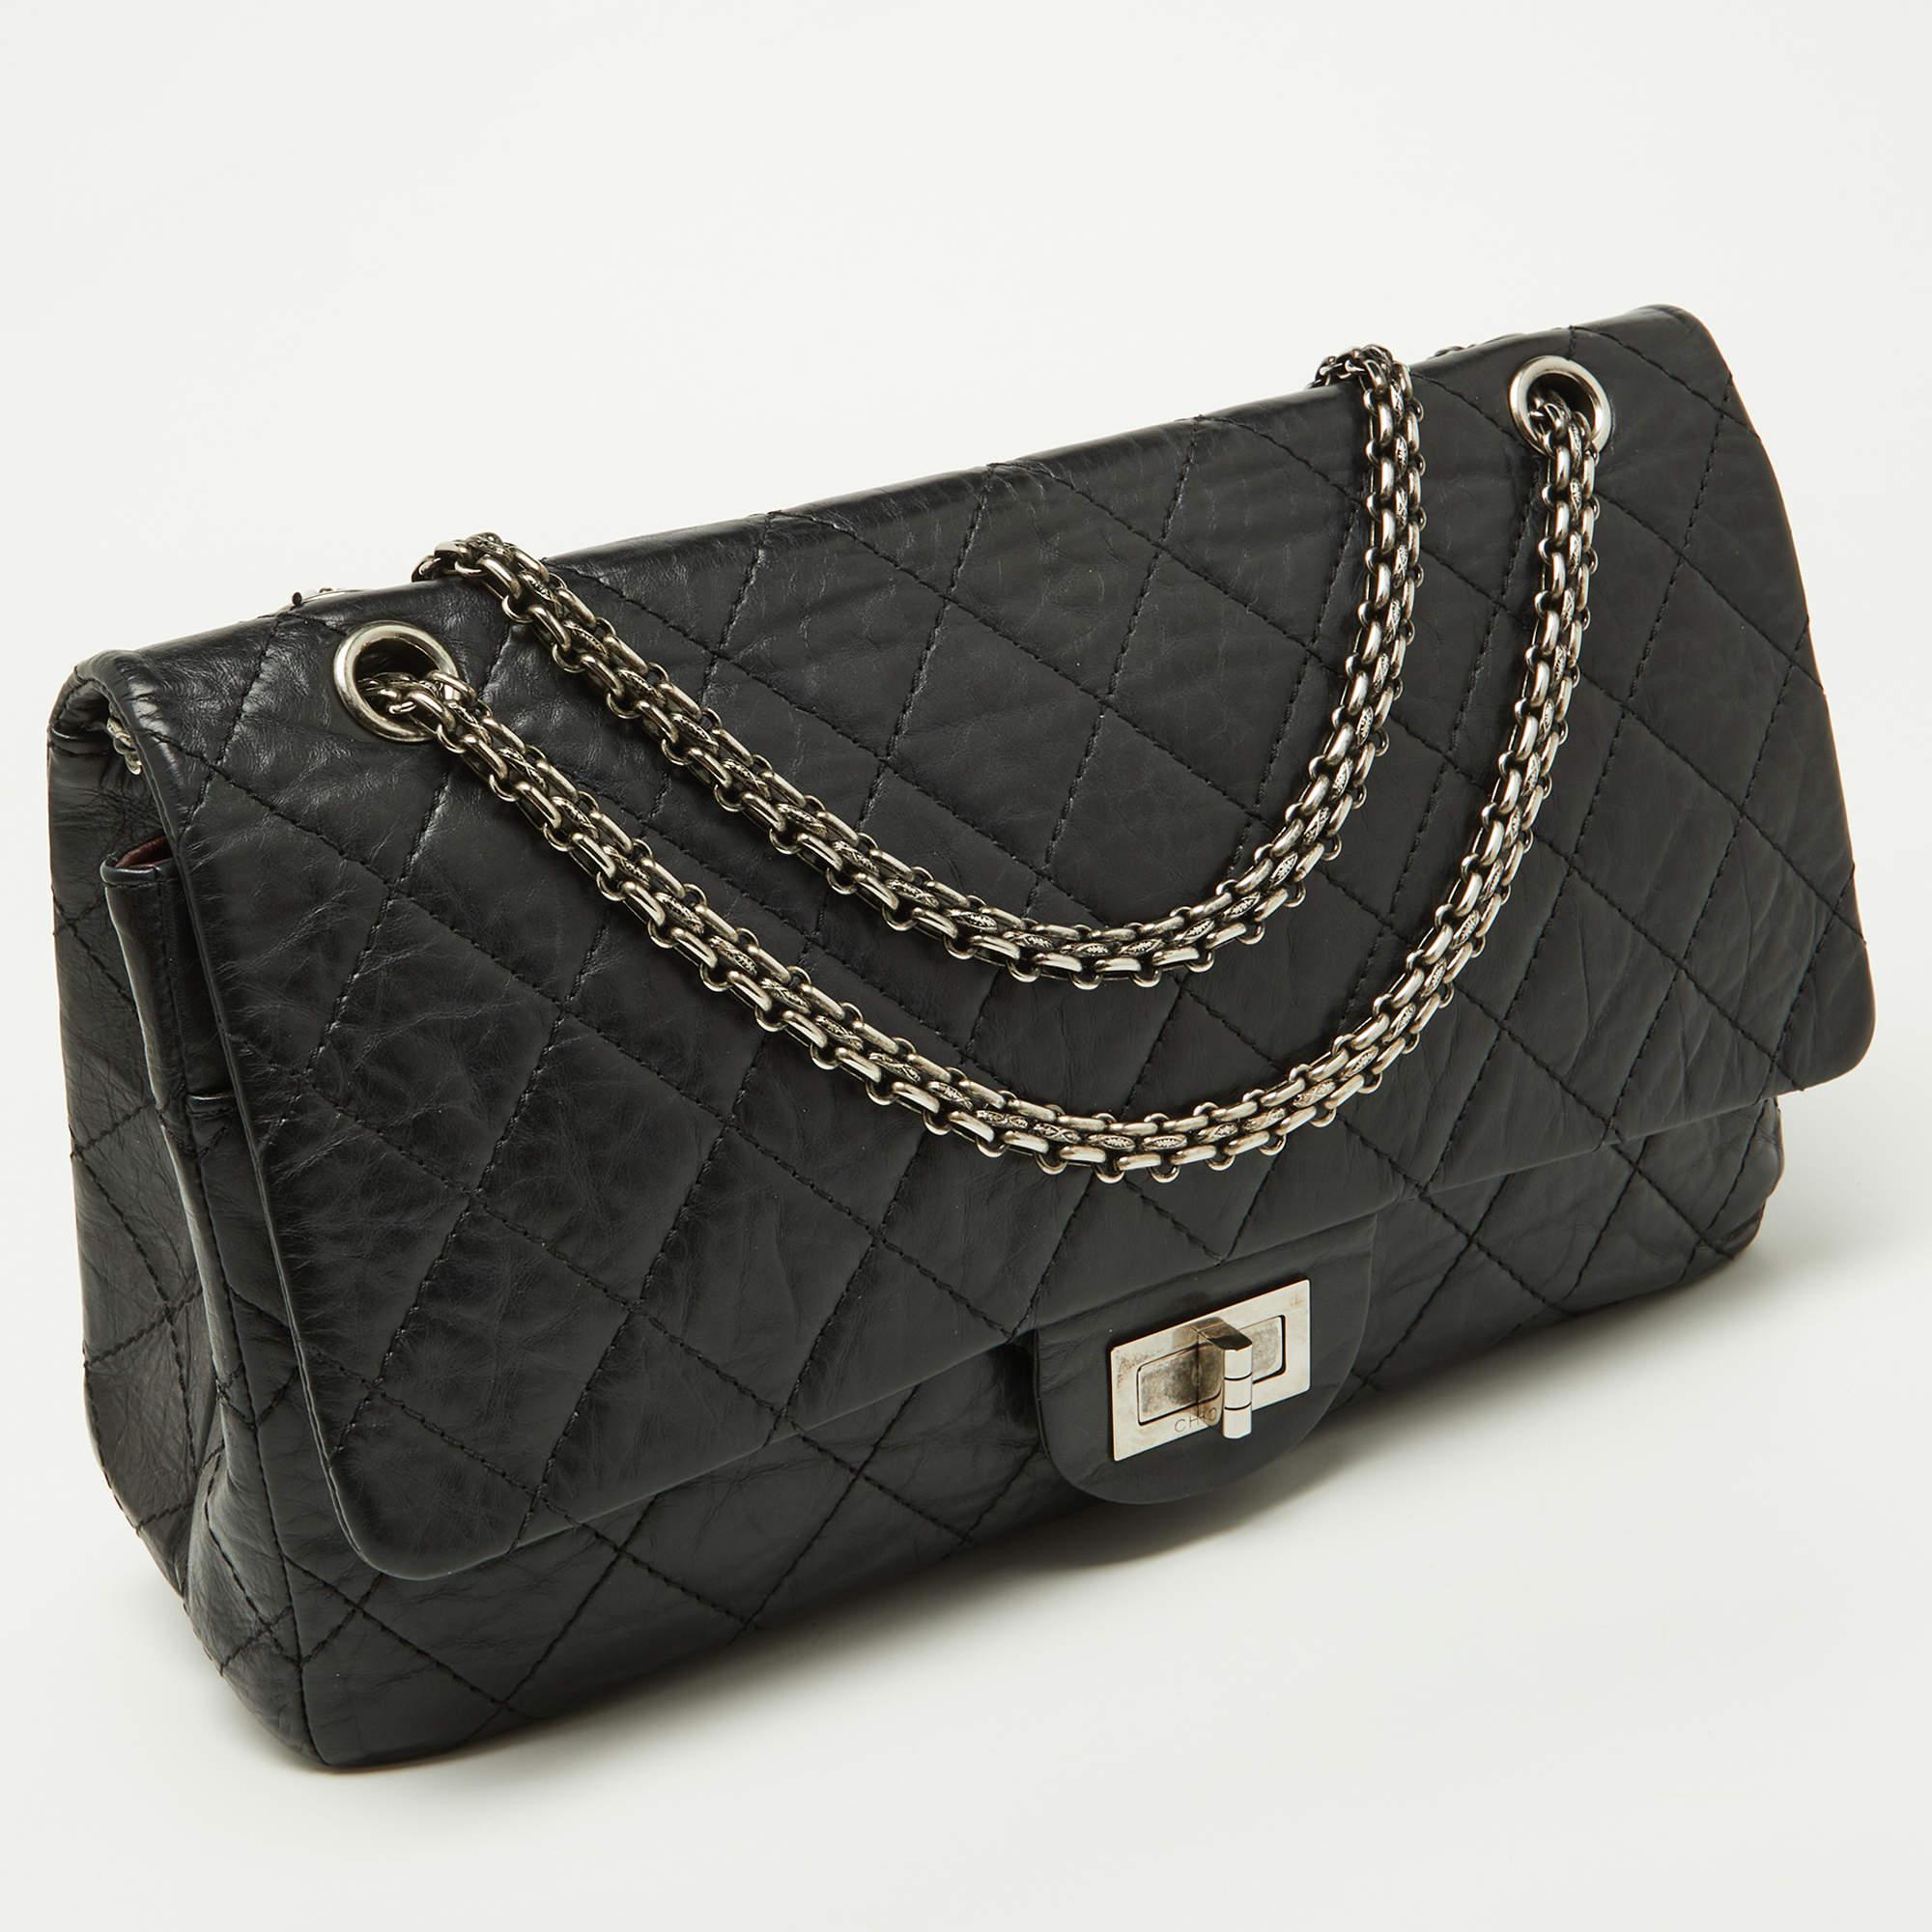 Chanel Black Quilted Aged Leather Reissue 2.55 Classic 227 Flap Bag In Good Condition For Sale In Dubai, Al Qouz 2